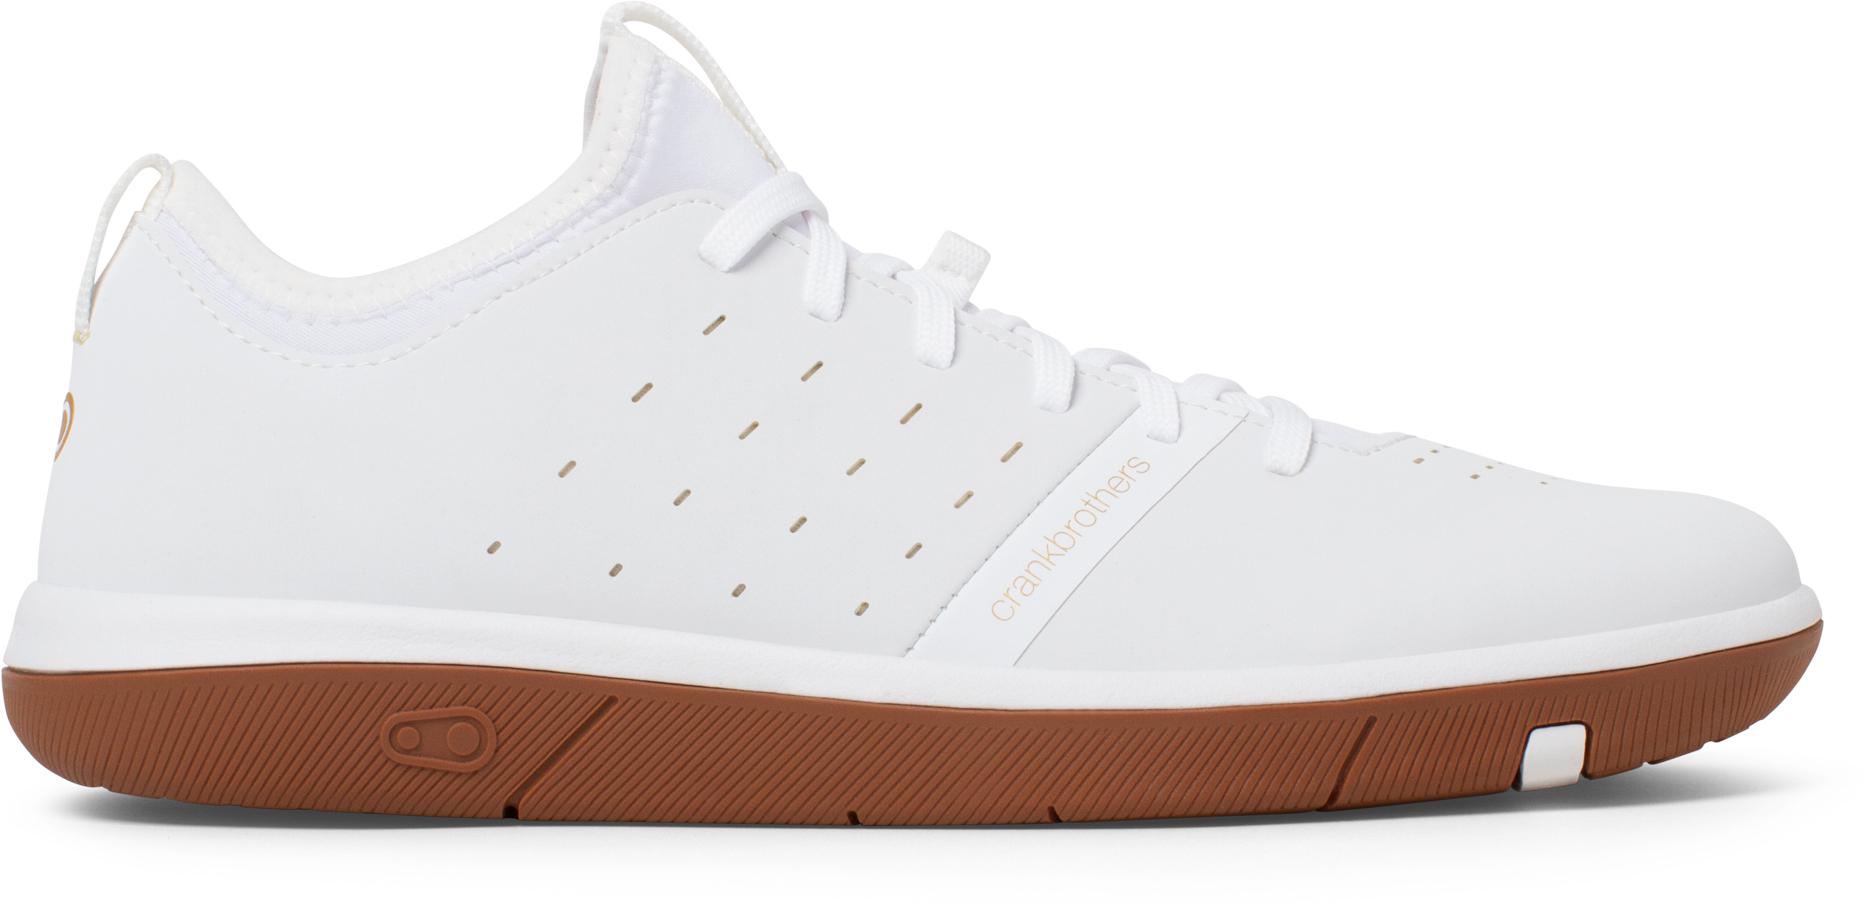 Crankbrothers Stamp Street Flat Pedal Mtb Cycling Shoes - White/gold/gum